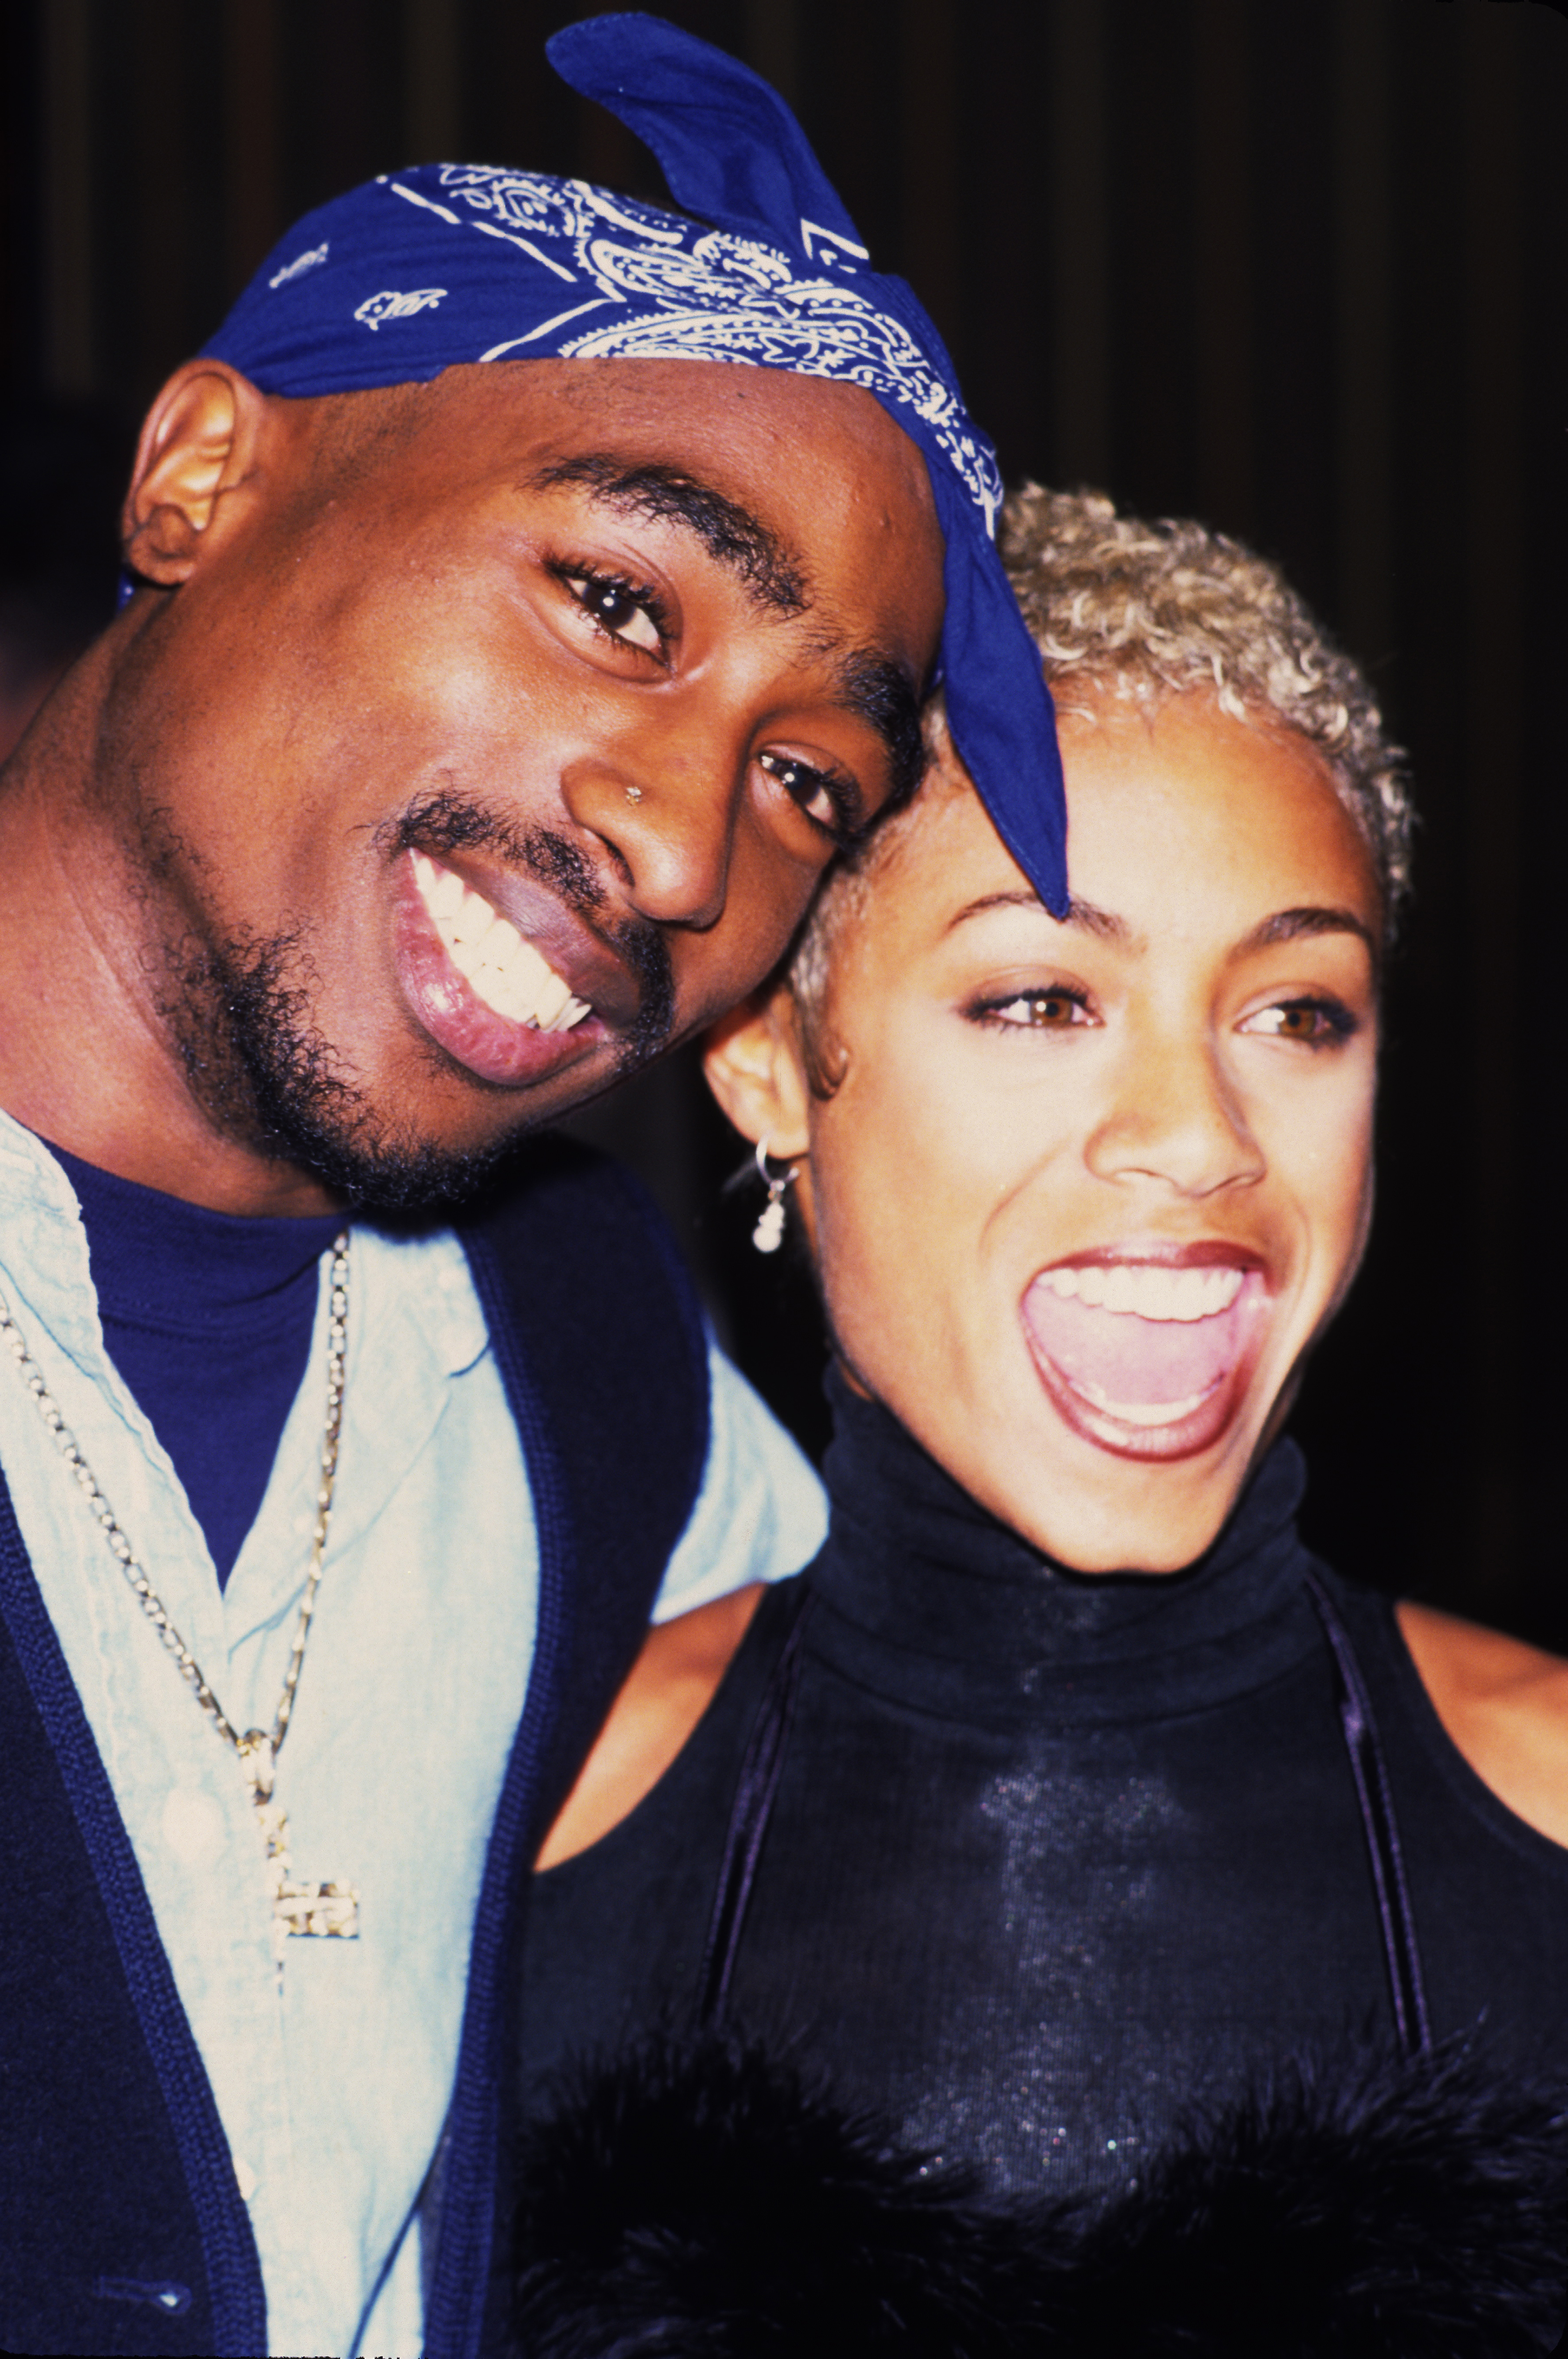 Late rapper and actor Tupac Shakur during a movie primiere in New York in 1996 | Source: Getty Images